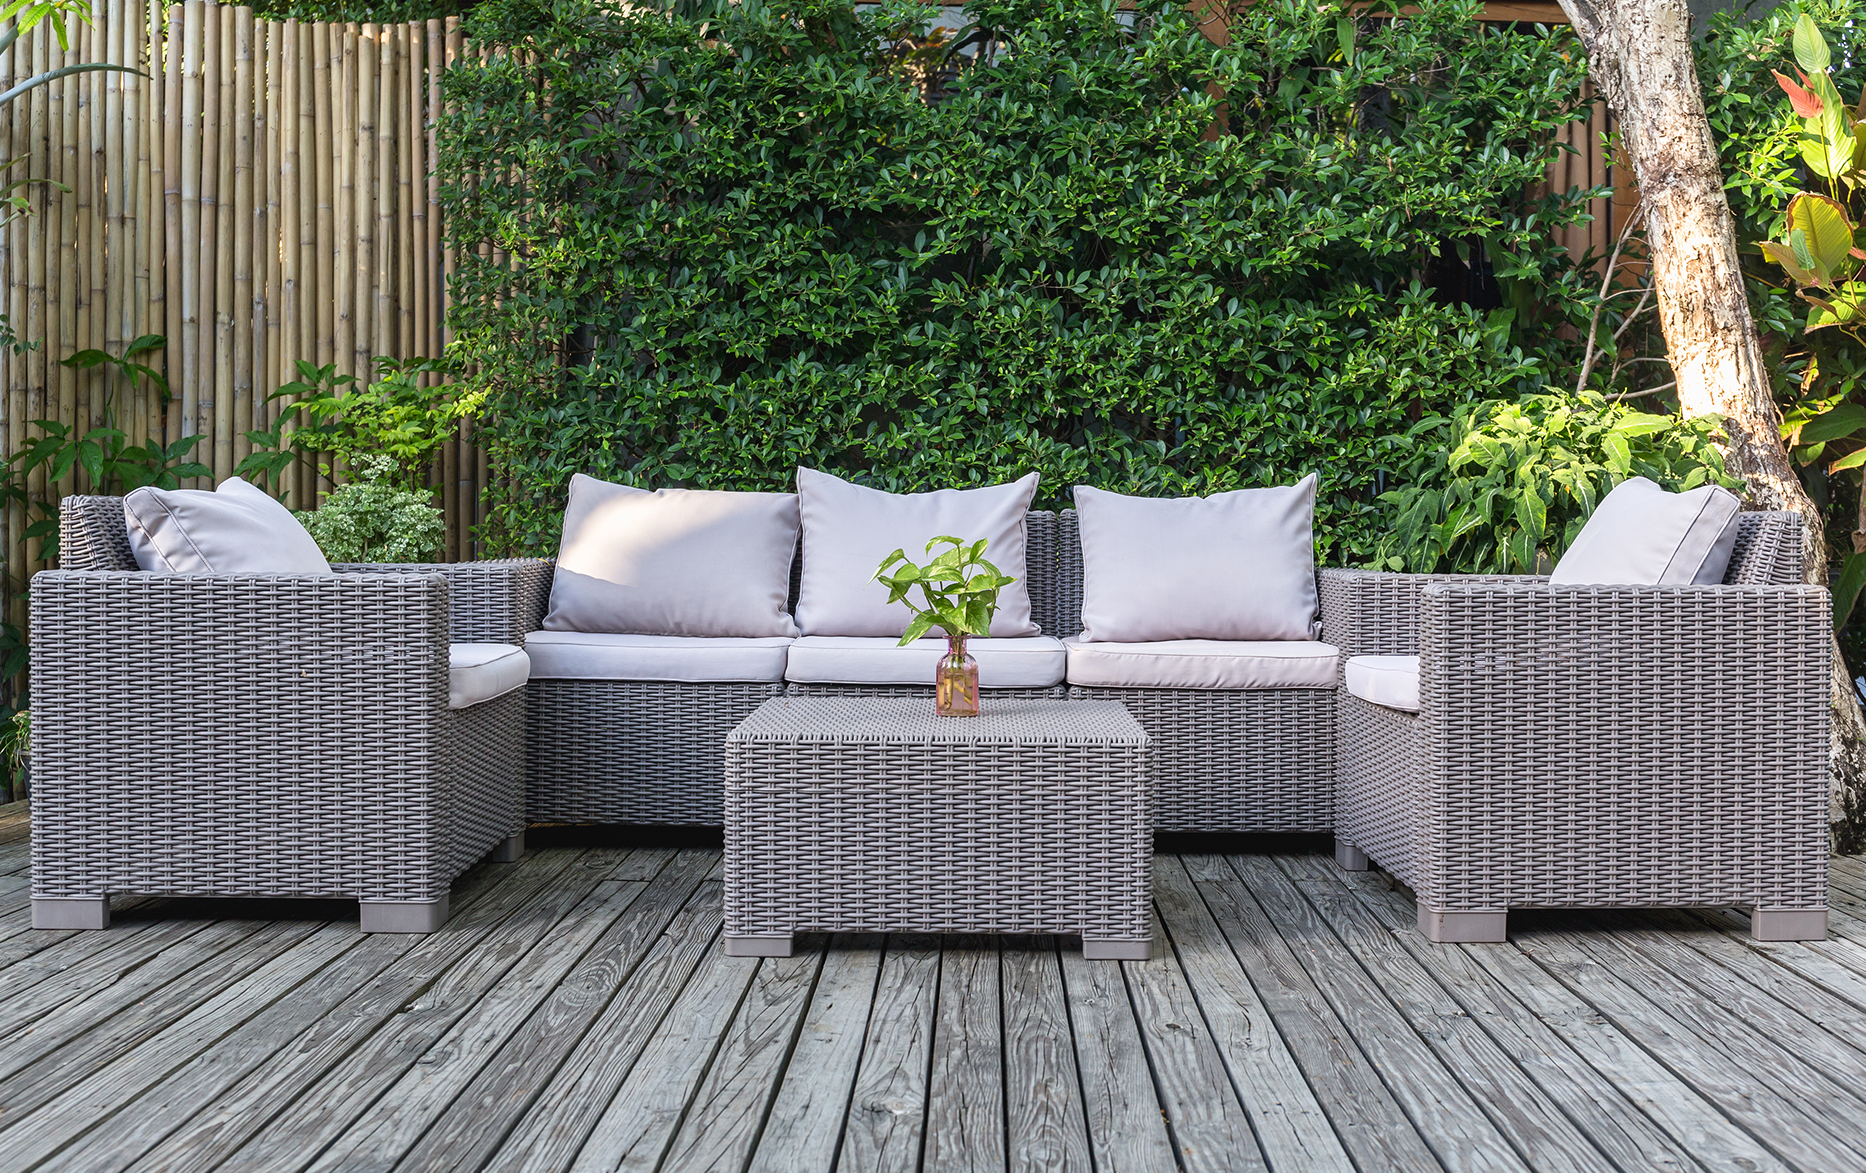 How to Clean Plastic Patio Furniture